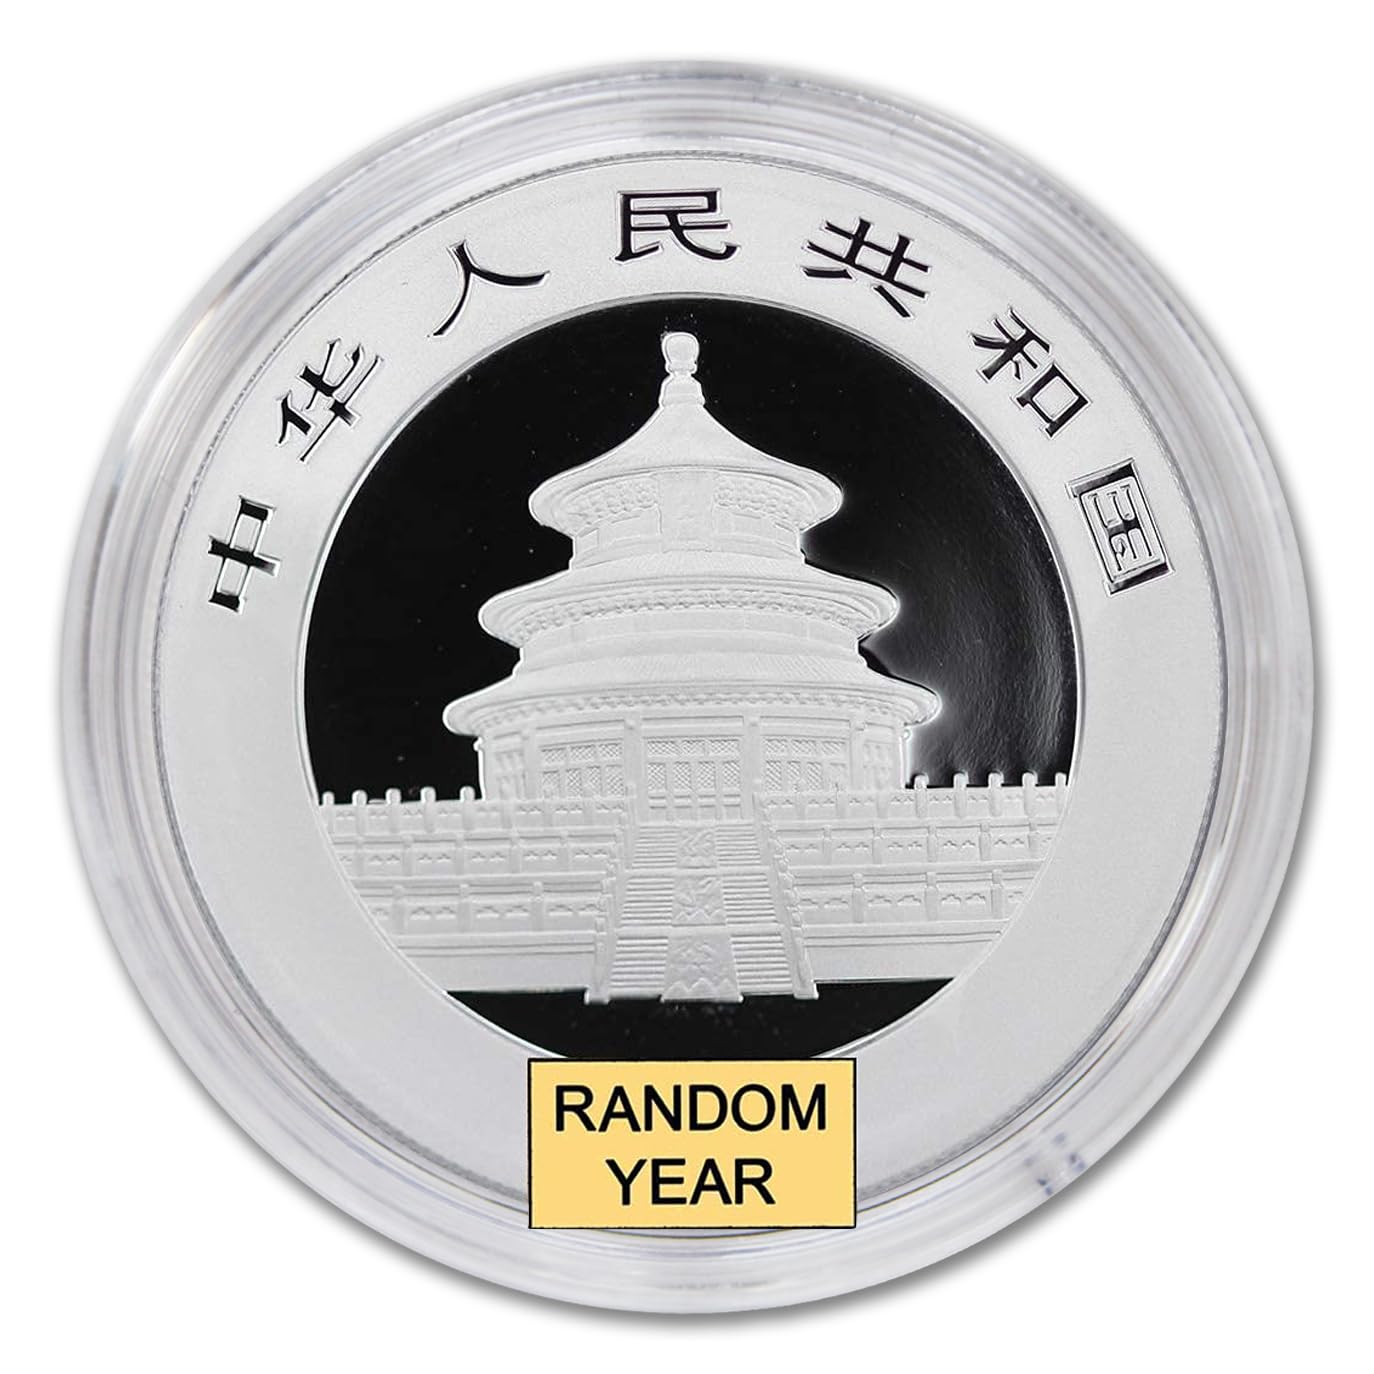 2016 - Present (Random Year) 30 Gram Chinese Silver Panda Coin (in Capsule) Brilliant Uncirculated with Certificate of Authenticity ¥10 Yuan BU